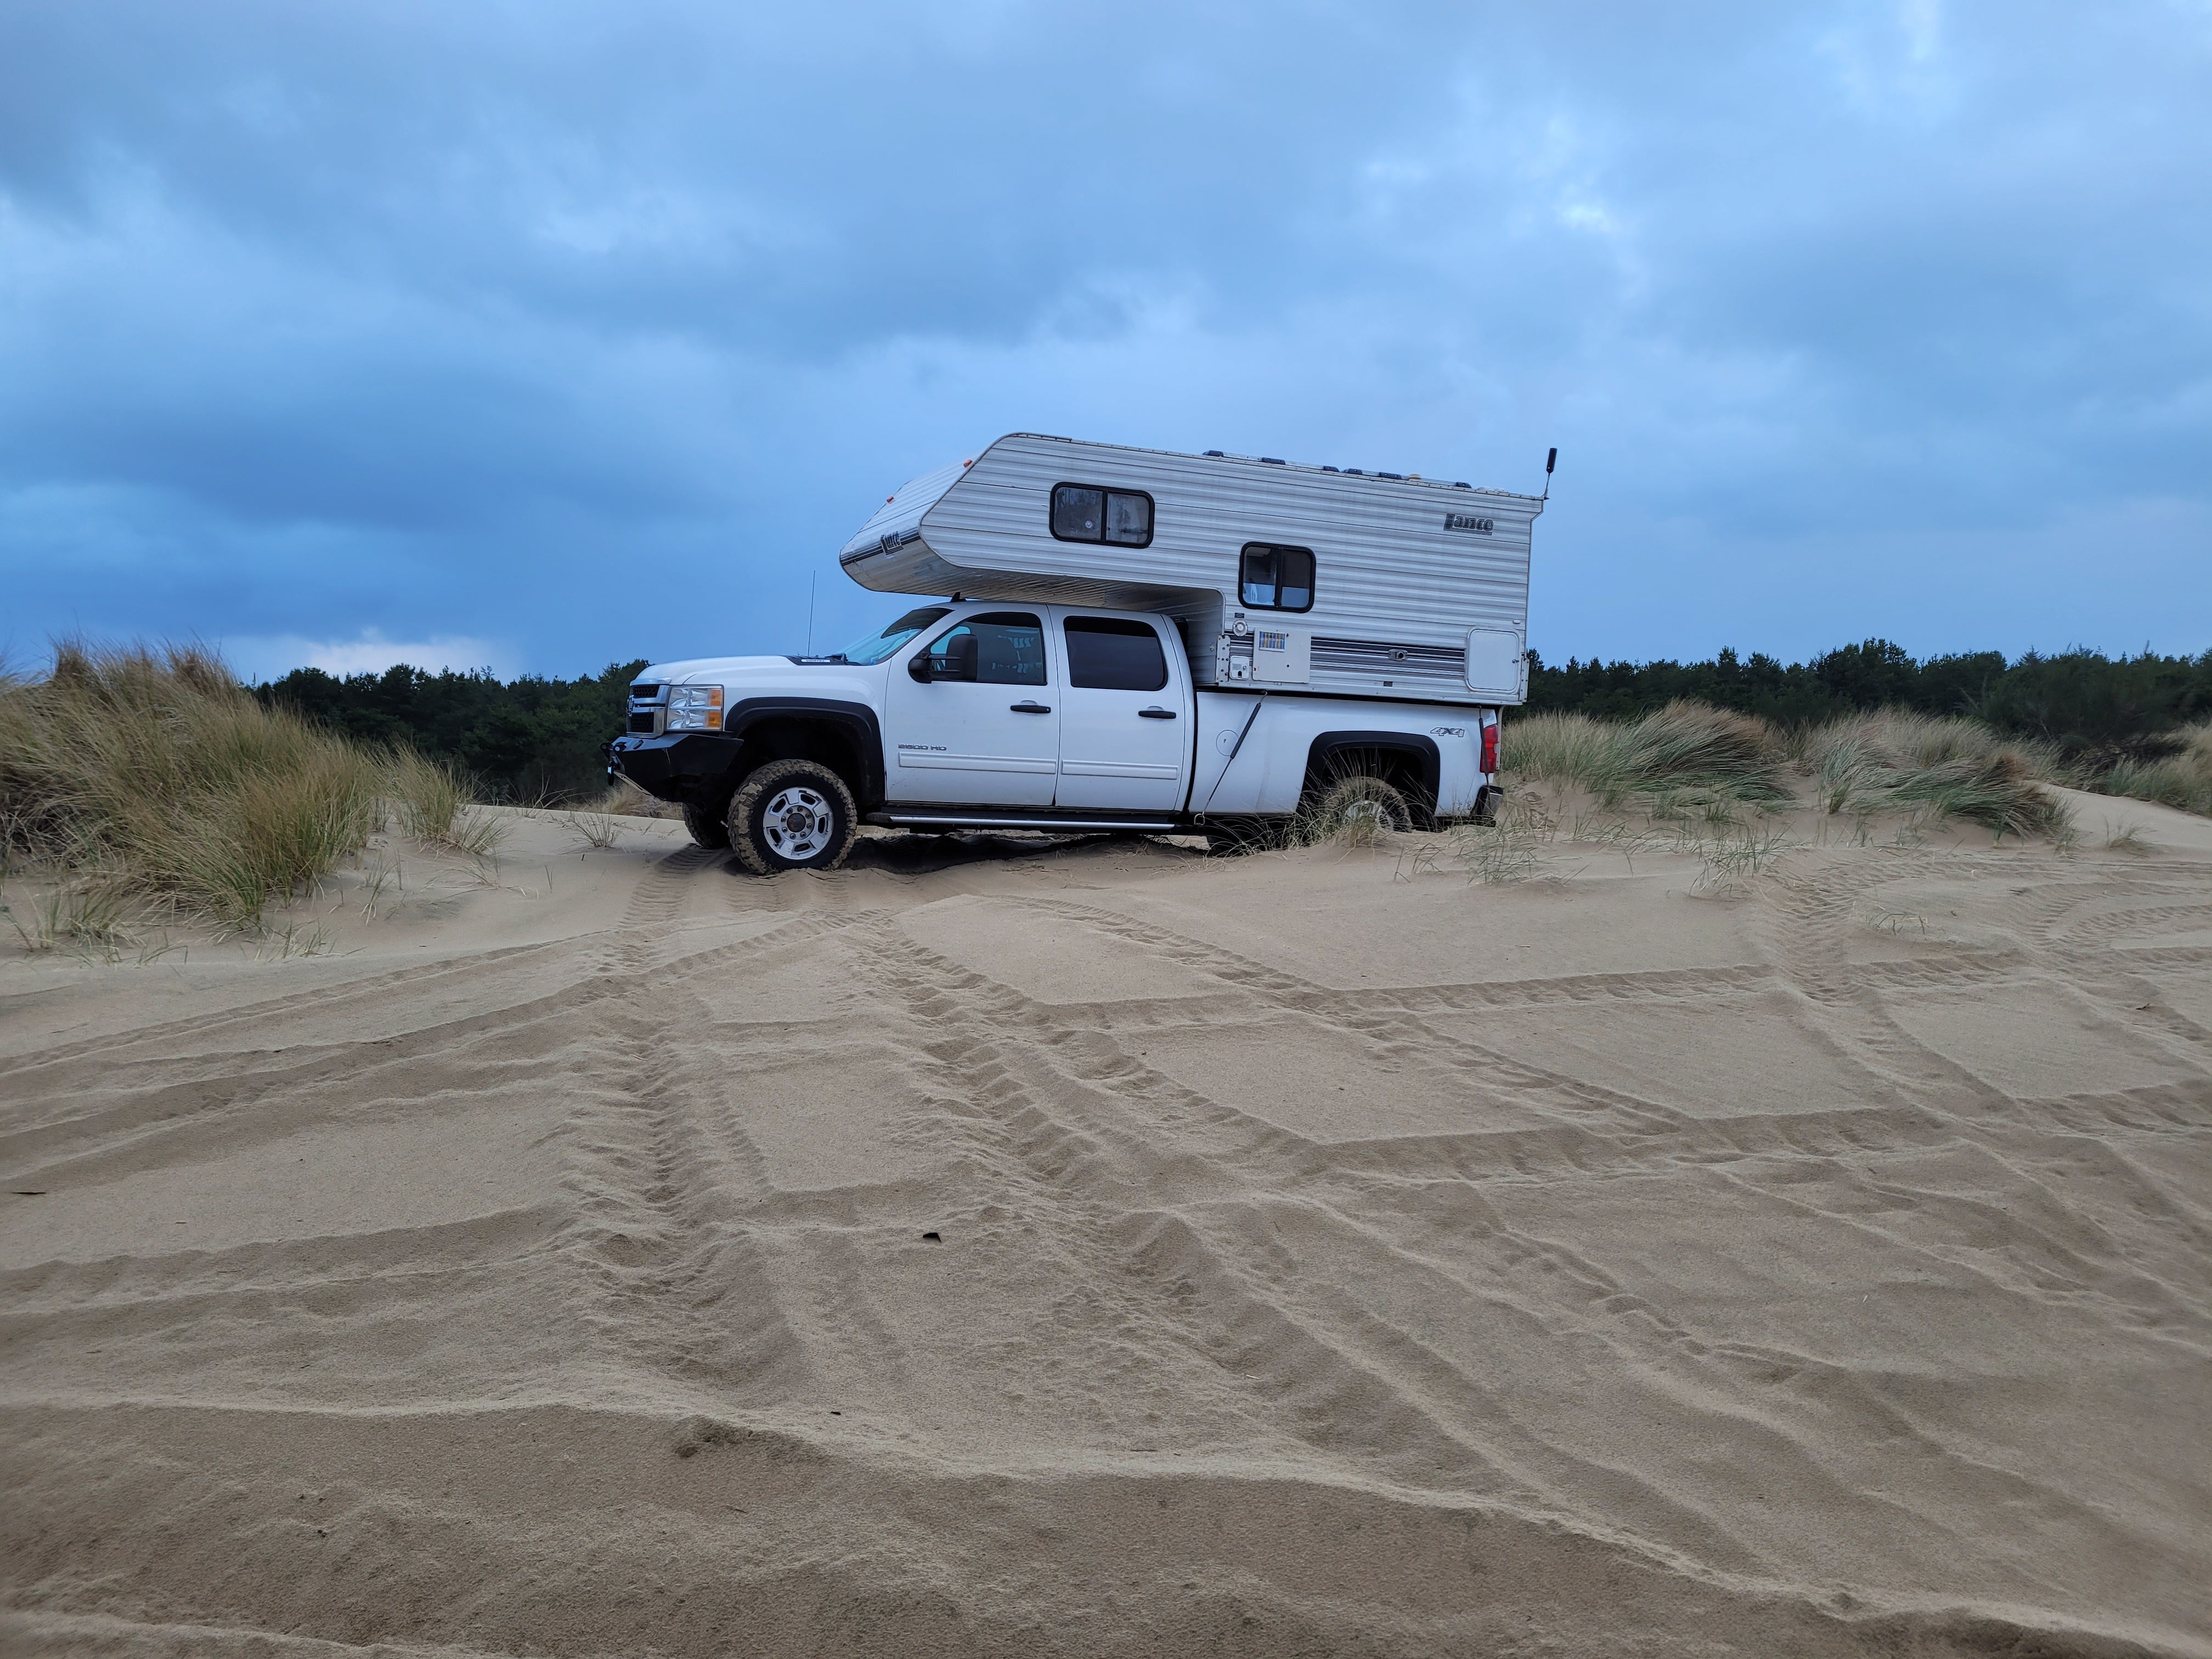 Camper submitted image from South Jetty Sand Camping - 3